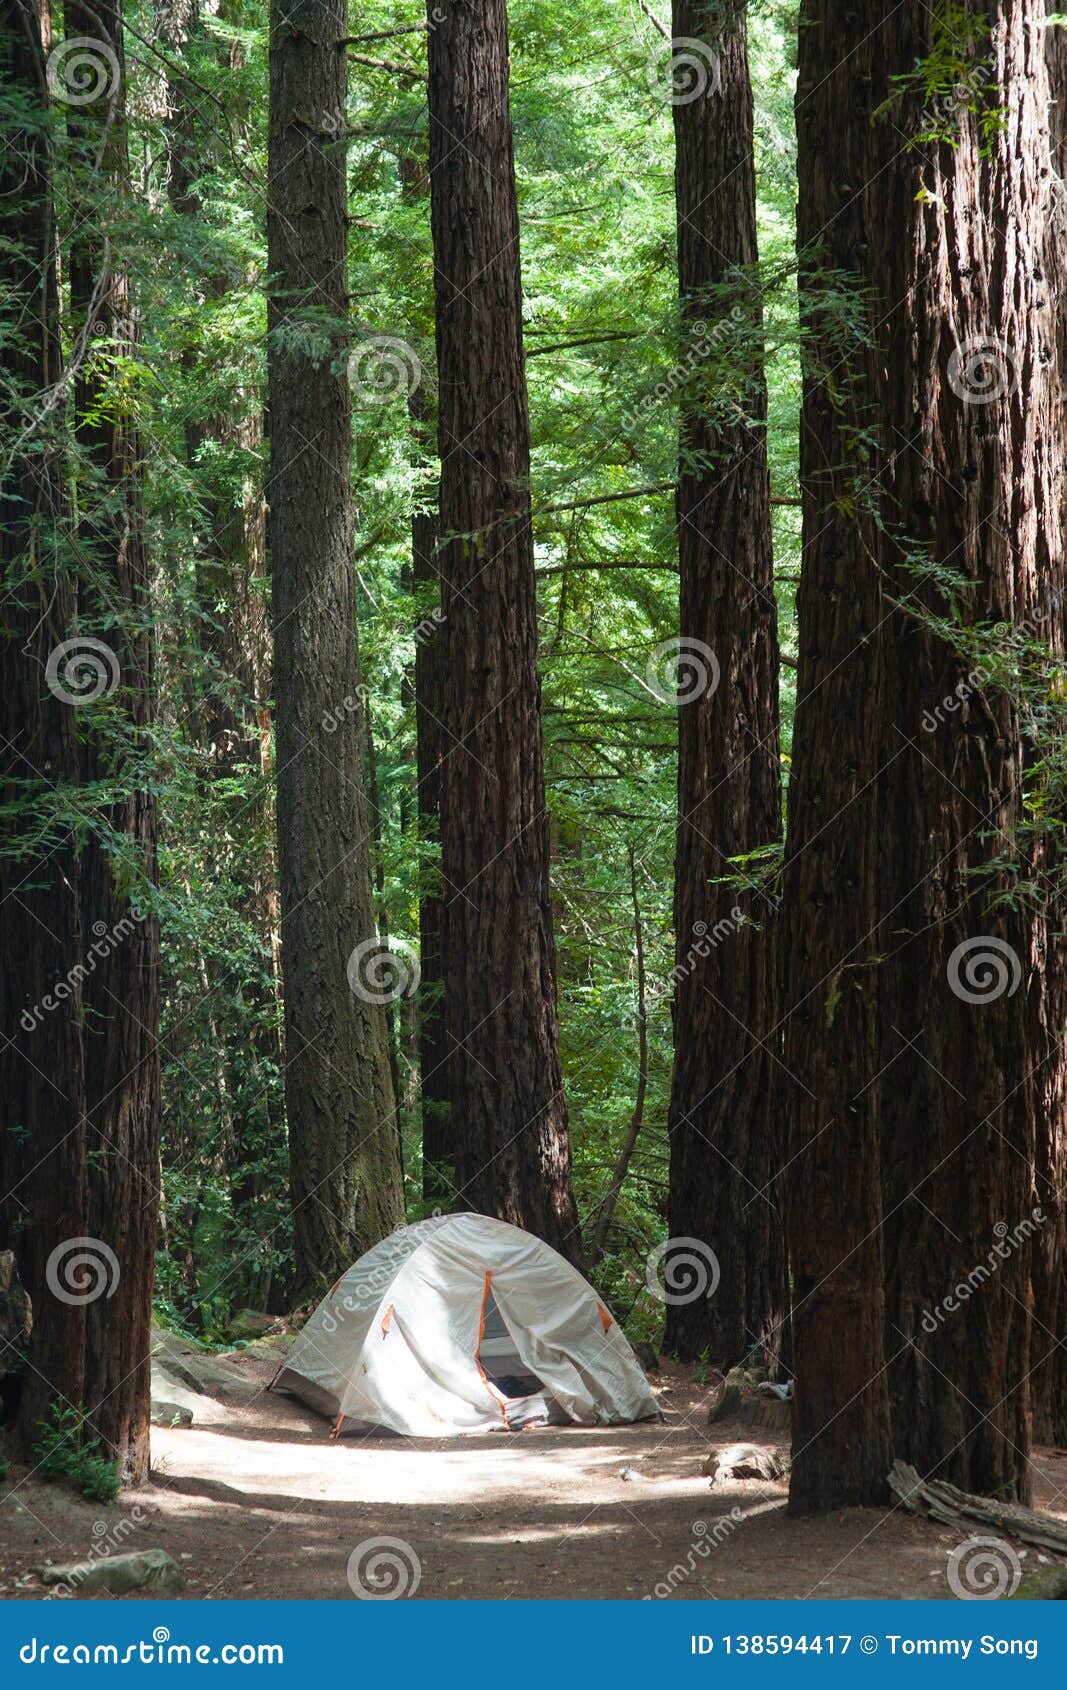 campground and tent at big basin redwoods state park